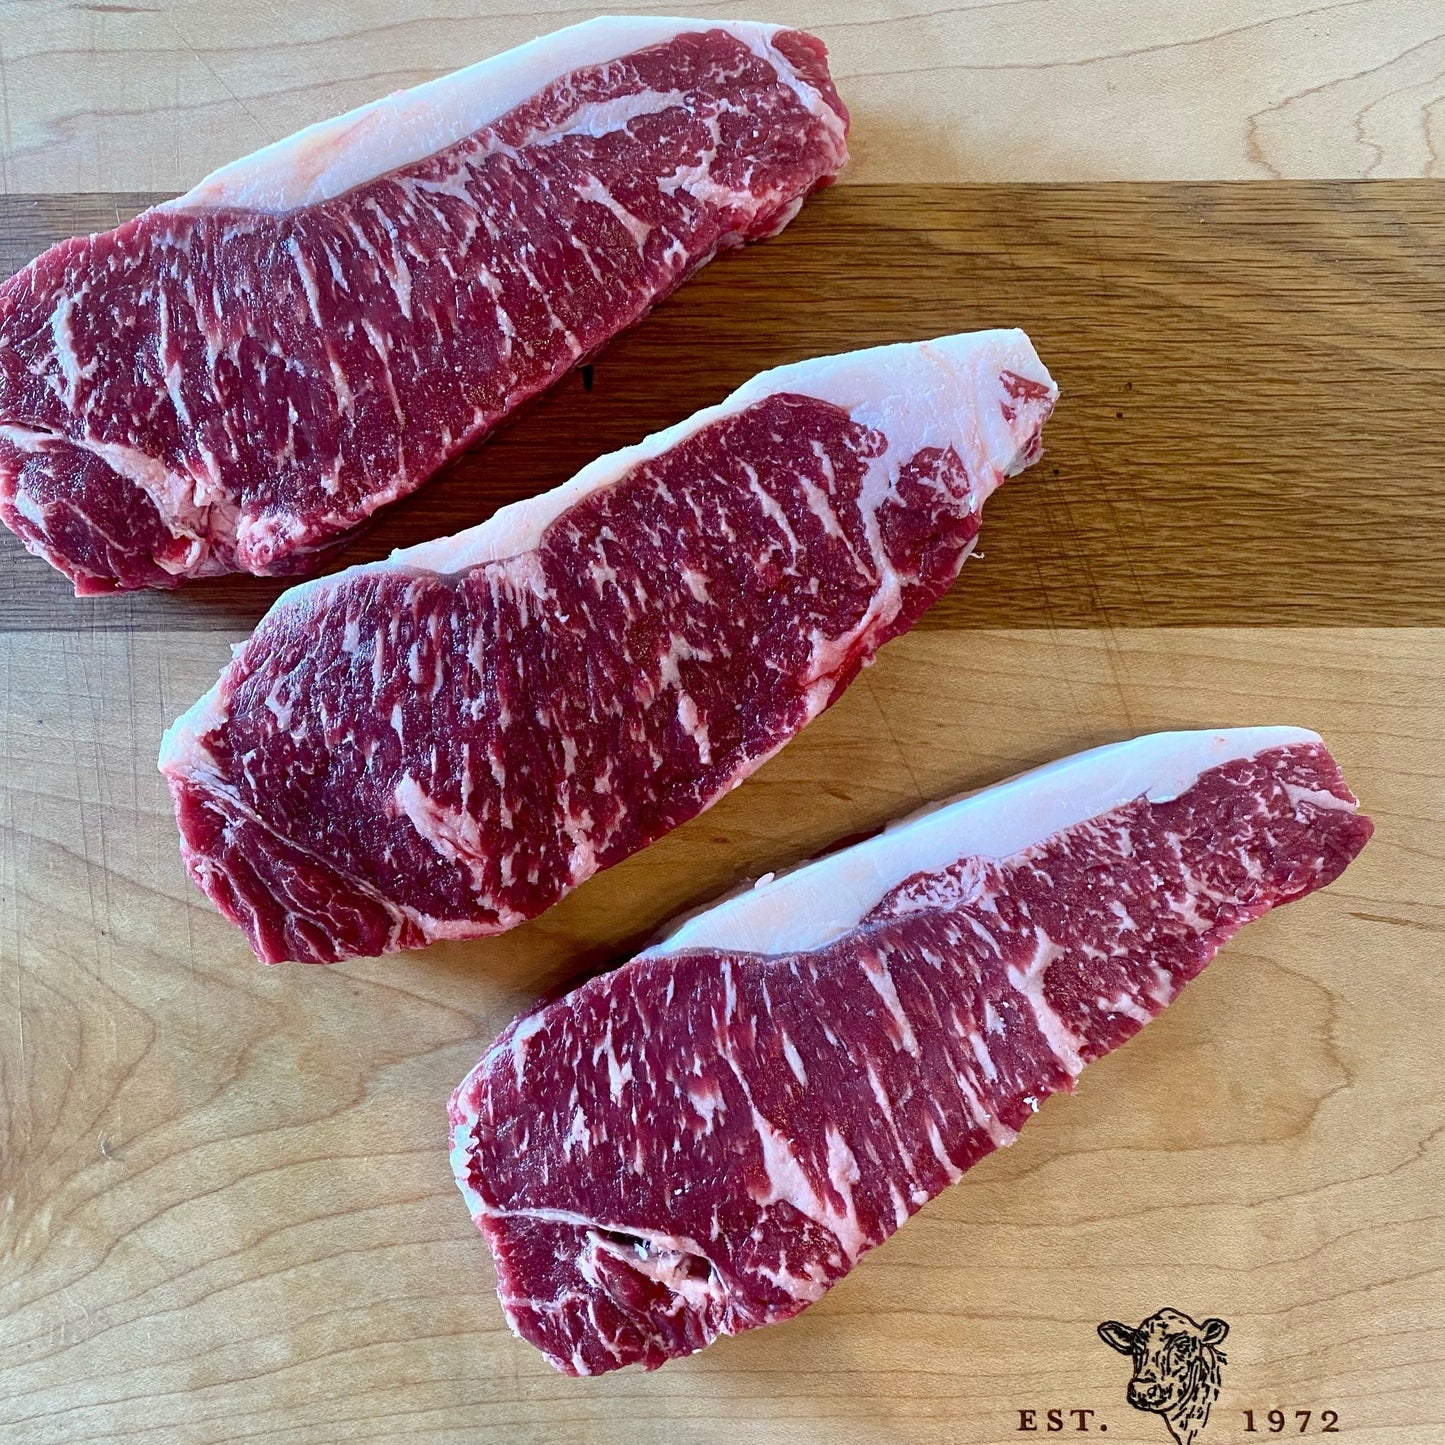 October 26th: All Things Steak with the Butchers